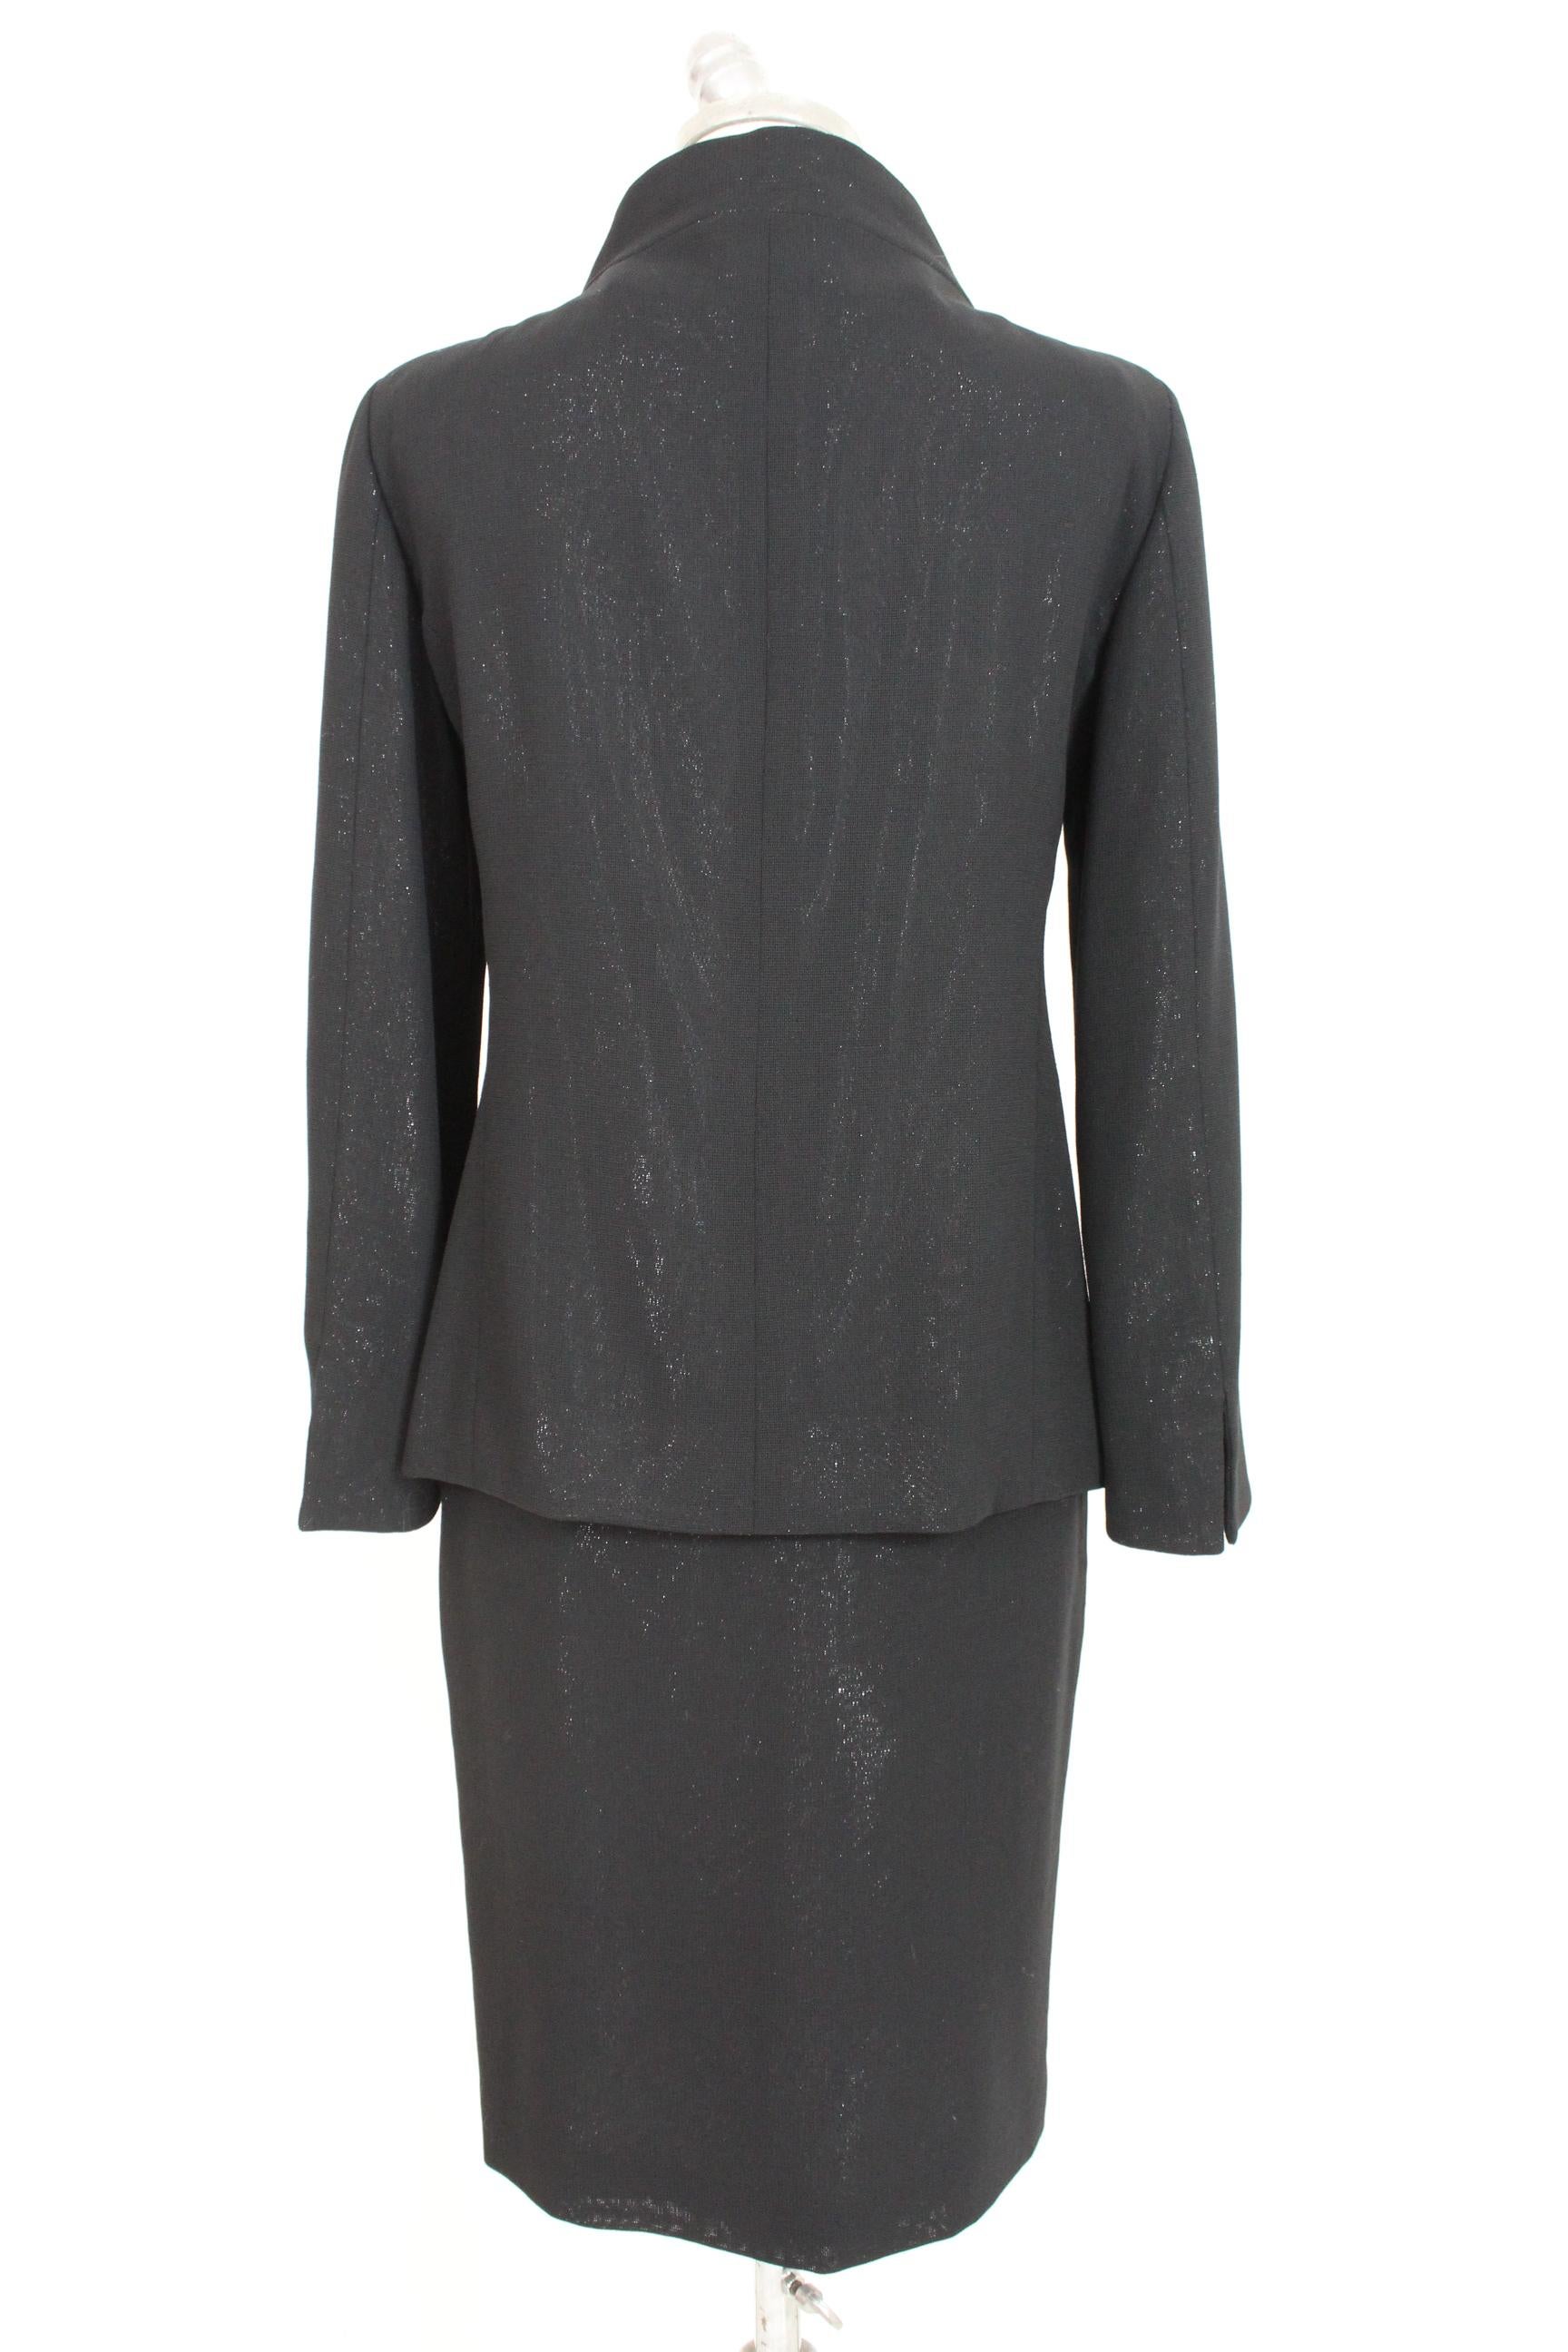 Gianni Versace Couture evening 80s vintage women's skirt suit. Jacket and skirt in wool and silk . Color black laminated, inside silver lining. Jacket with clip closure, sheath skirt with front slit. Made in Italy. Excellent vintage